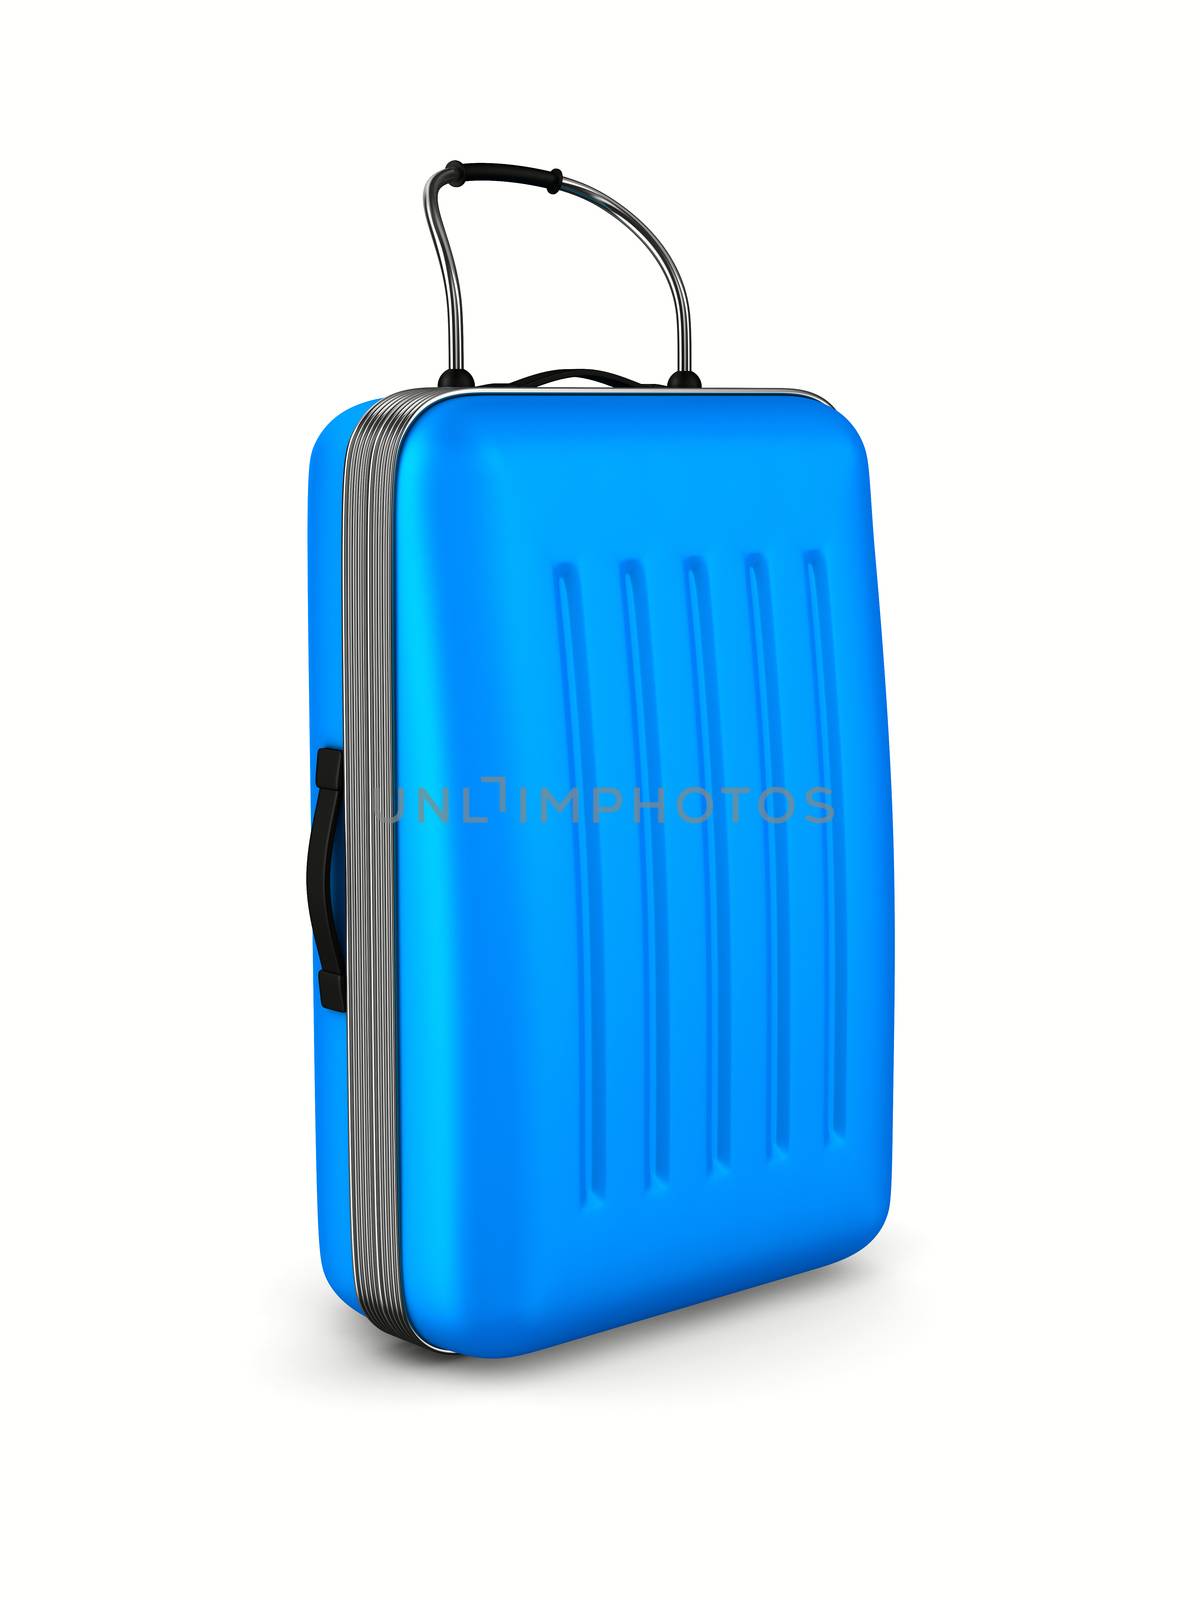 Travel bag on white background. Isolated 3D image by ISerg